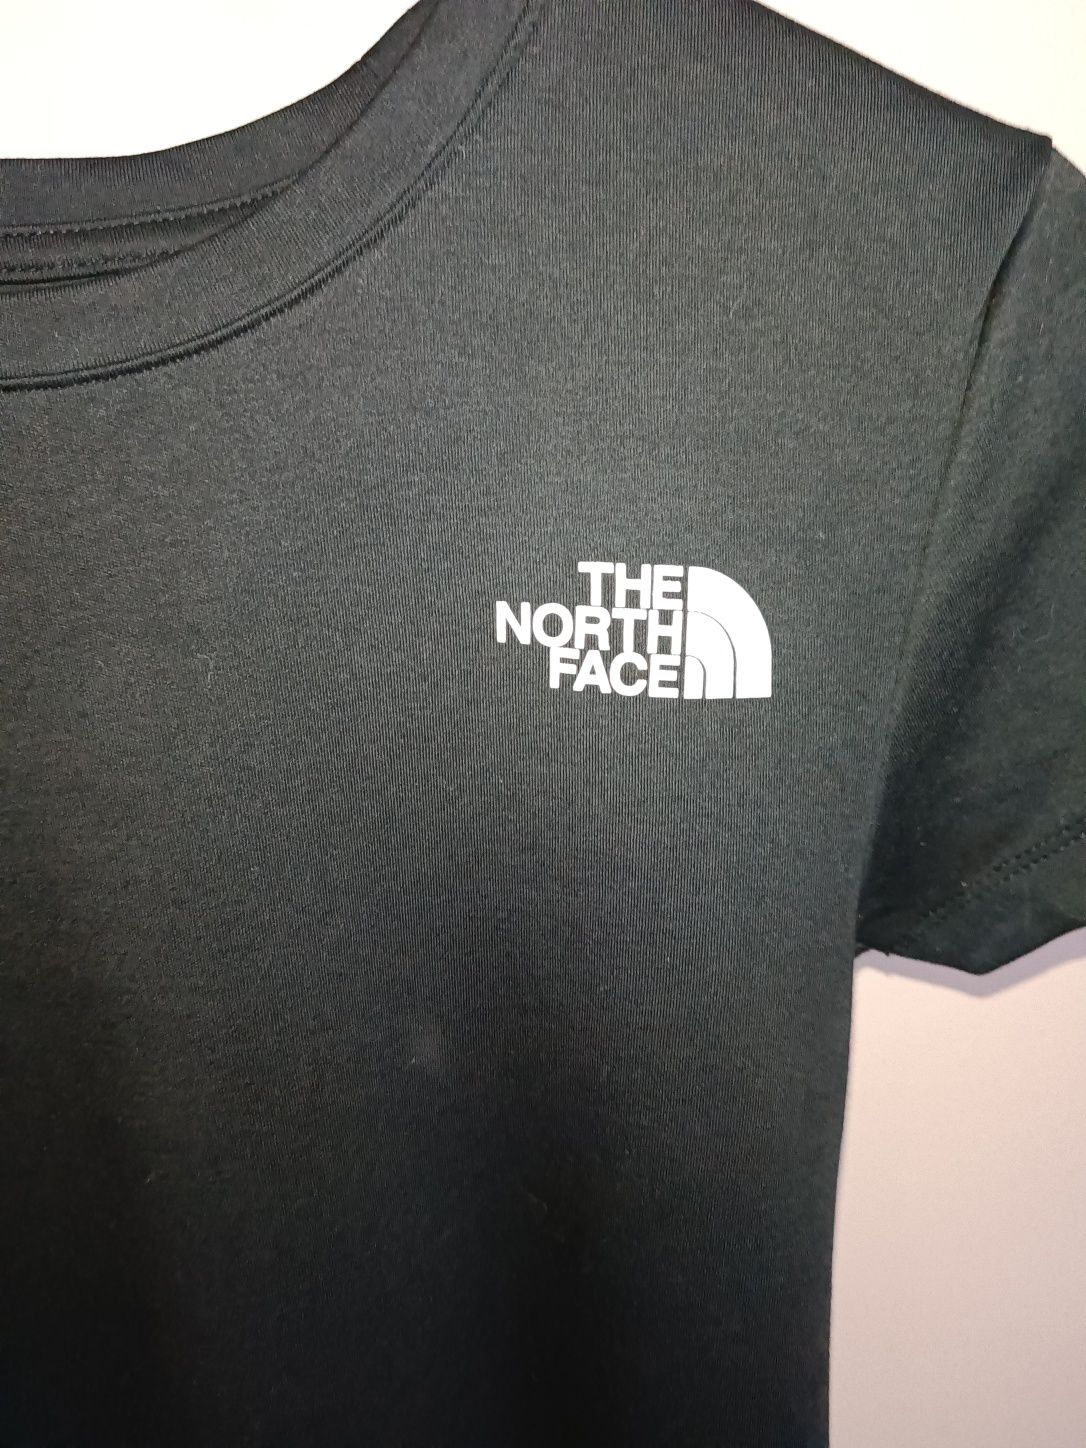 Body The north face